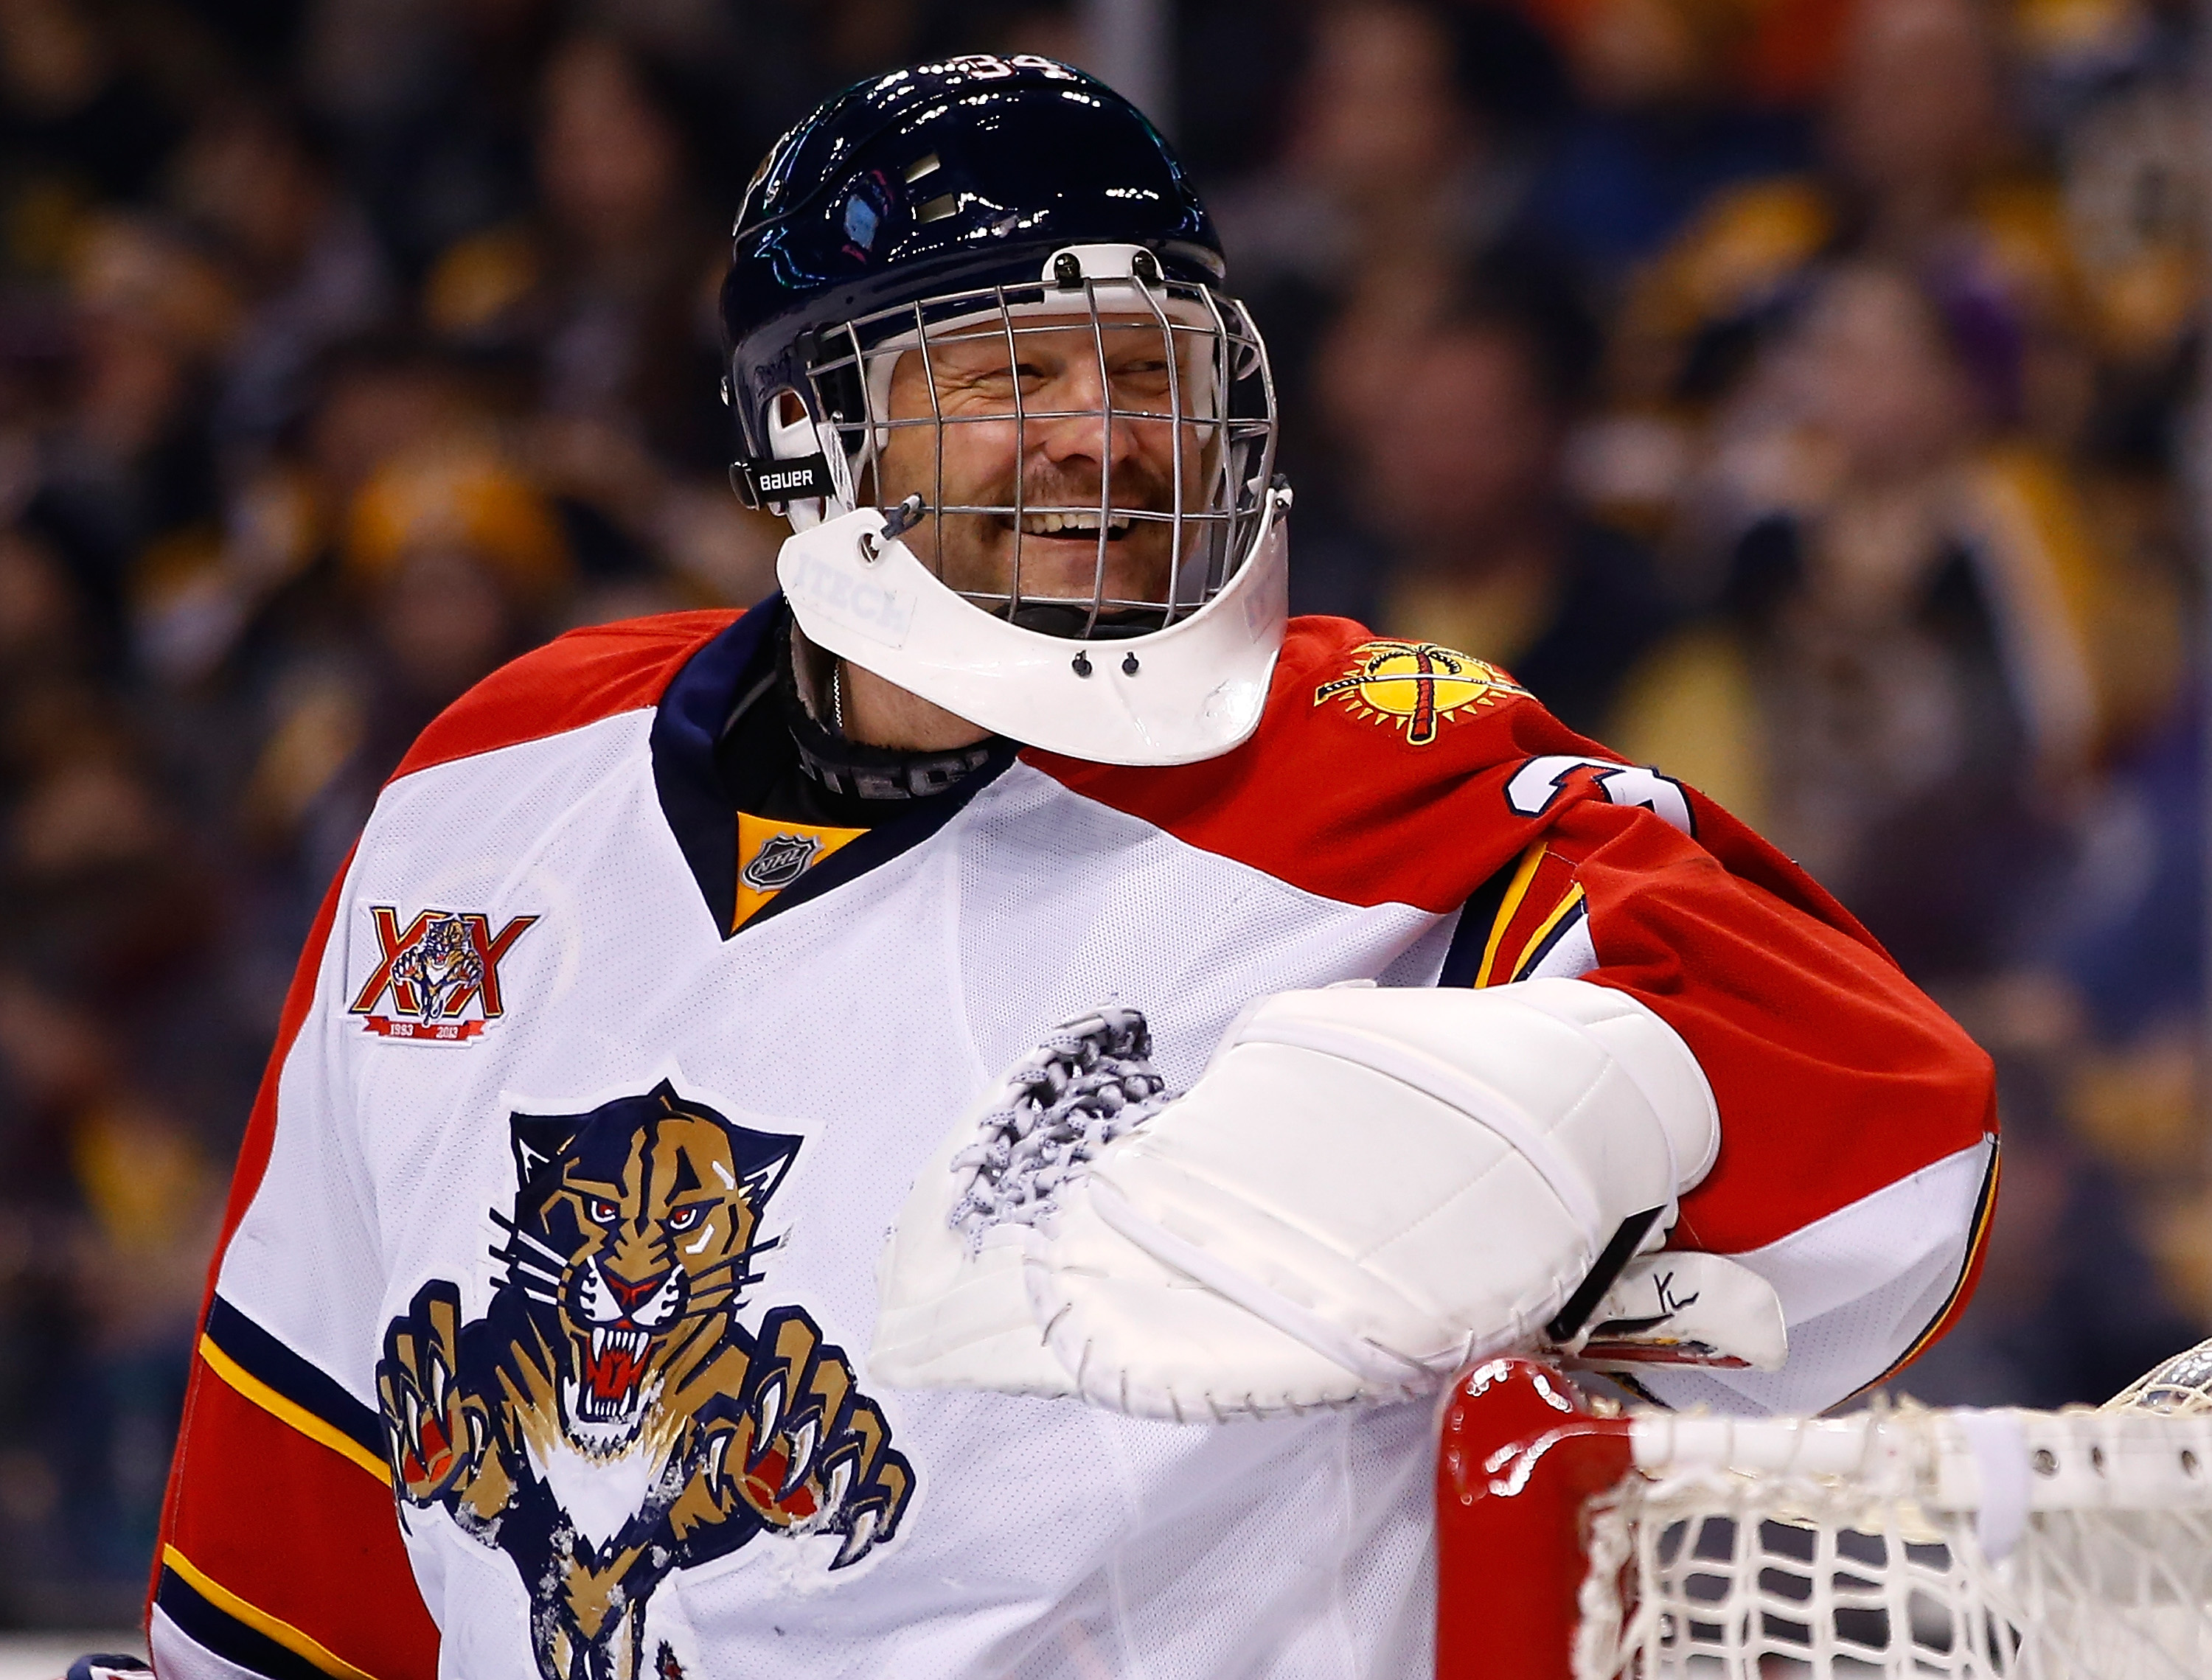 Former NHL goalie Tim Thomas makes first public comments in years